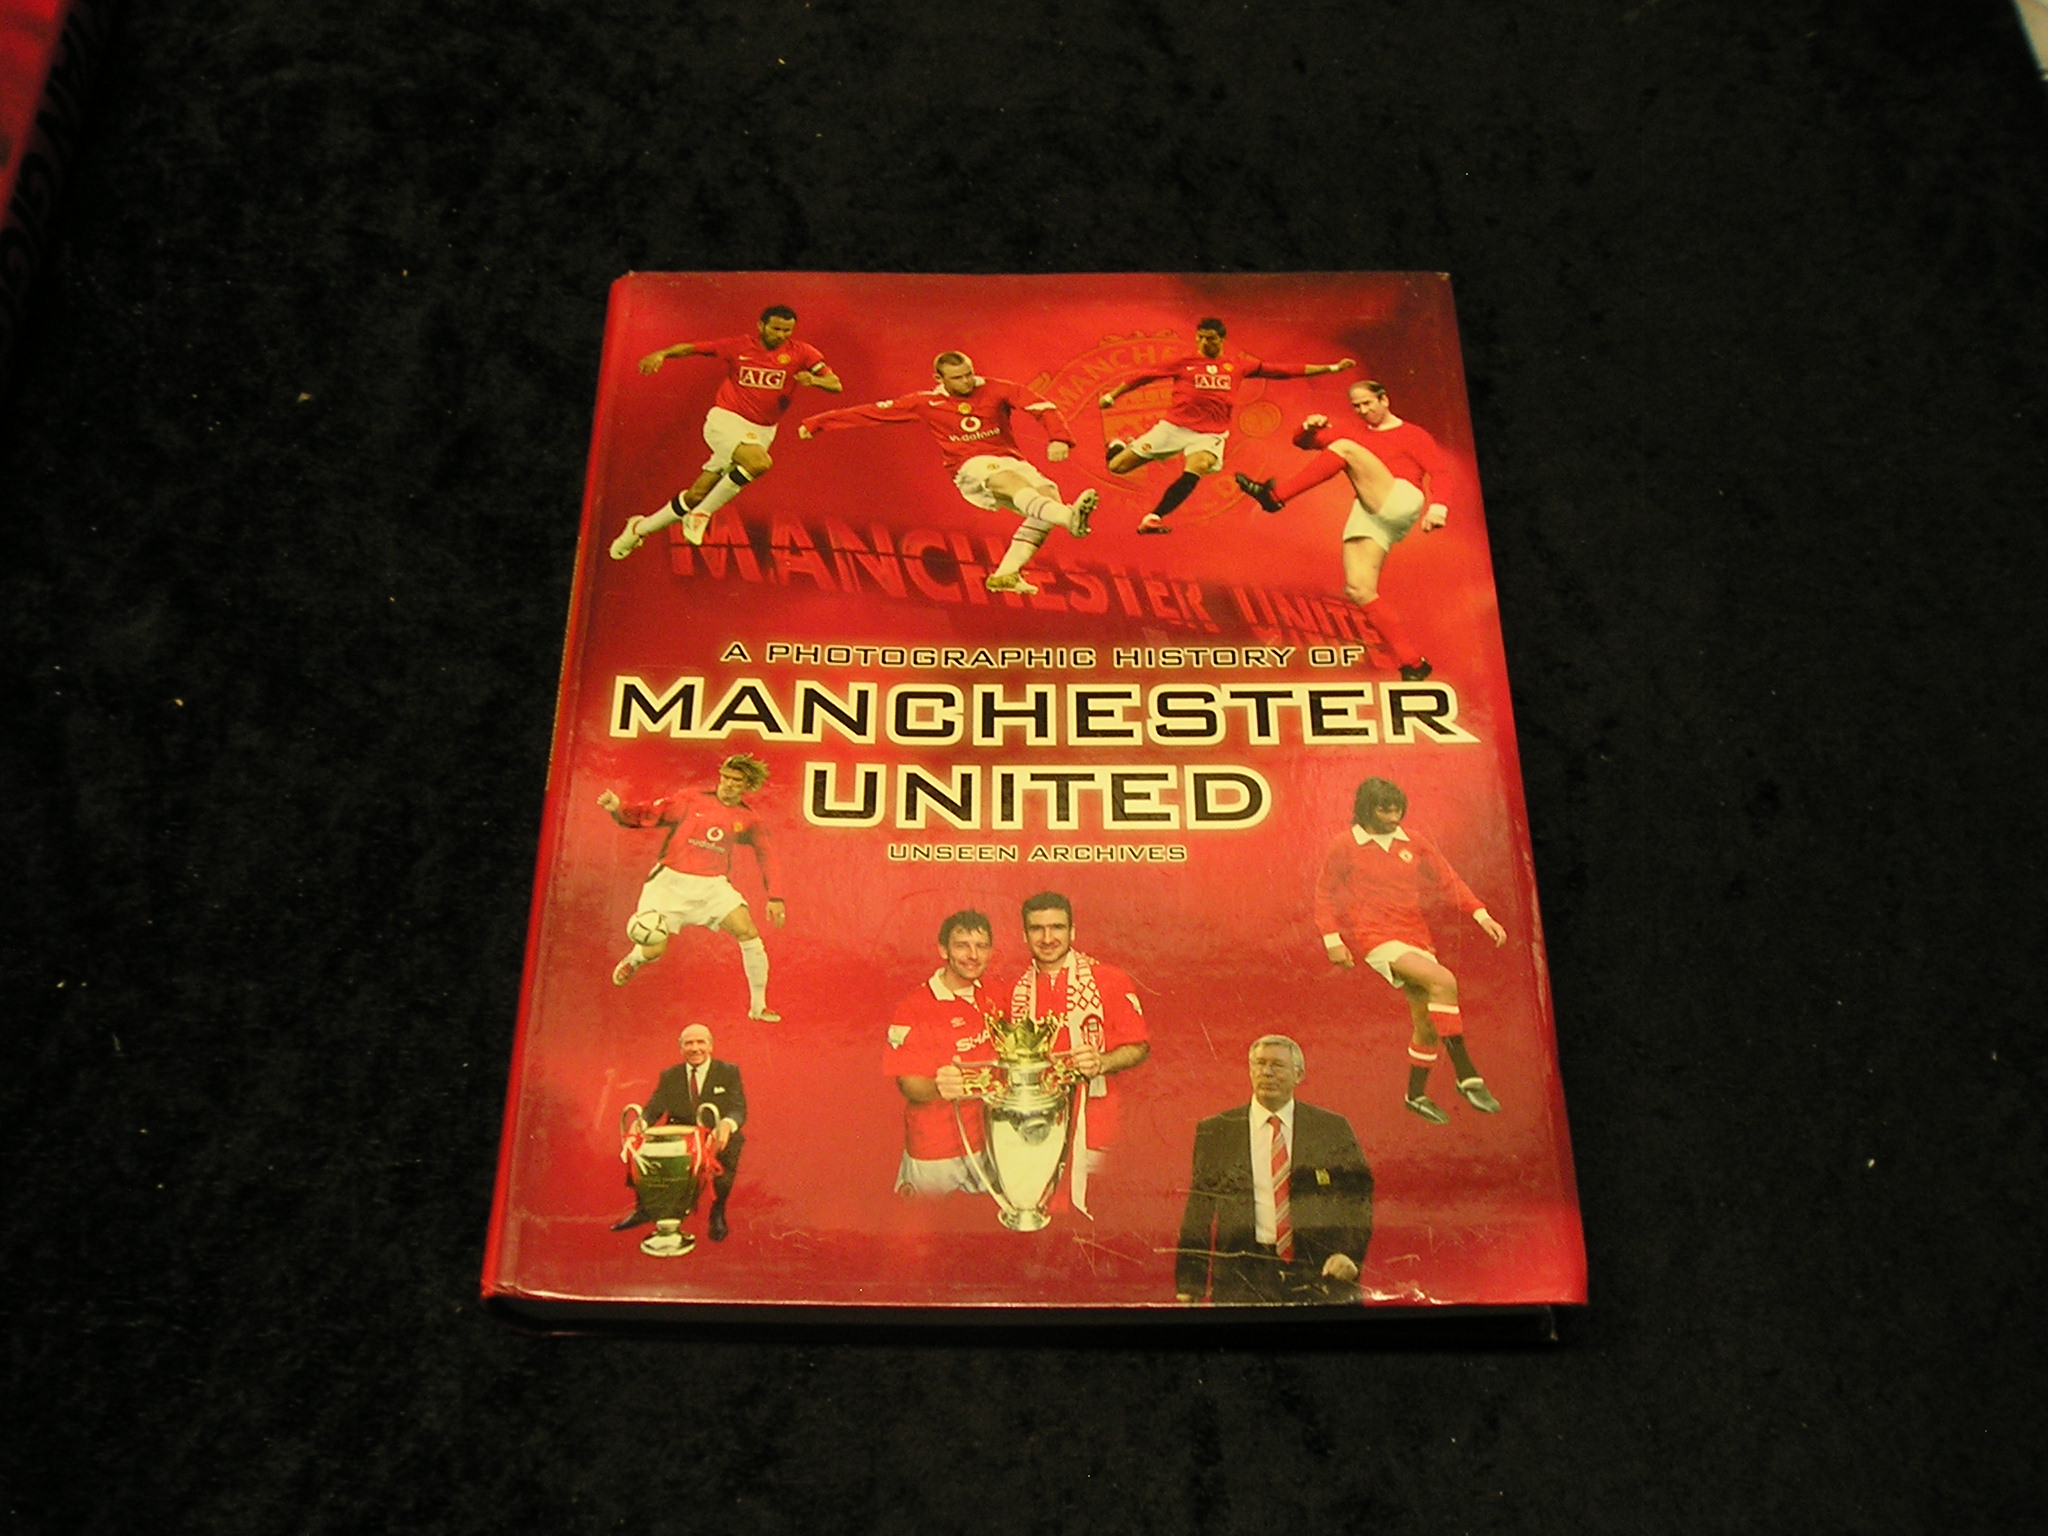 A Photographic History of Manchester United